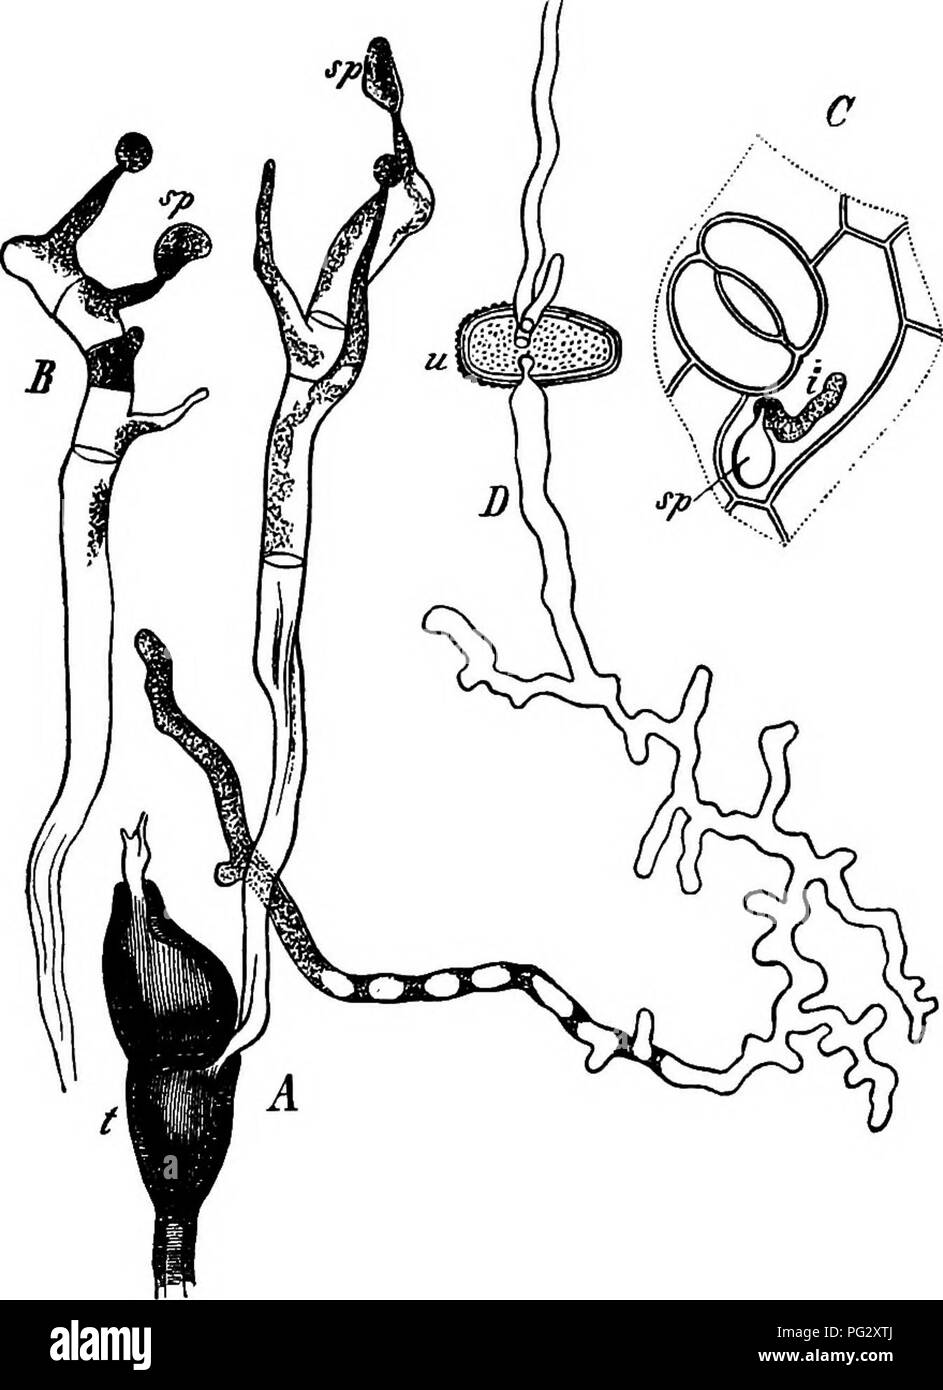 . Comparative morphology and biology of the fungi, mycetozoa and bacteria . Plant morphology; Fungi; Myxomycetes; Bacteriology. 28o DIVISION II.—COURUE OF DEVELOPMENT OF FUNGI. the outer surface of somewhat cushion-shaped bodies, which are formed by the interweaving of mycelial hyphae immediately beneath the epidermis of the host, more rarely at a greater depth, and burst through it when they form spores. Both are formed acrogenously on crowded sporiferous cells (sterigmata, basidia), which cover the outer surface of the hymenium, either alone or in certain species mixed with or surrounded by  Stock Photo